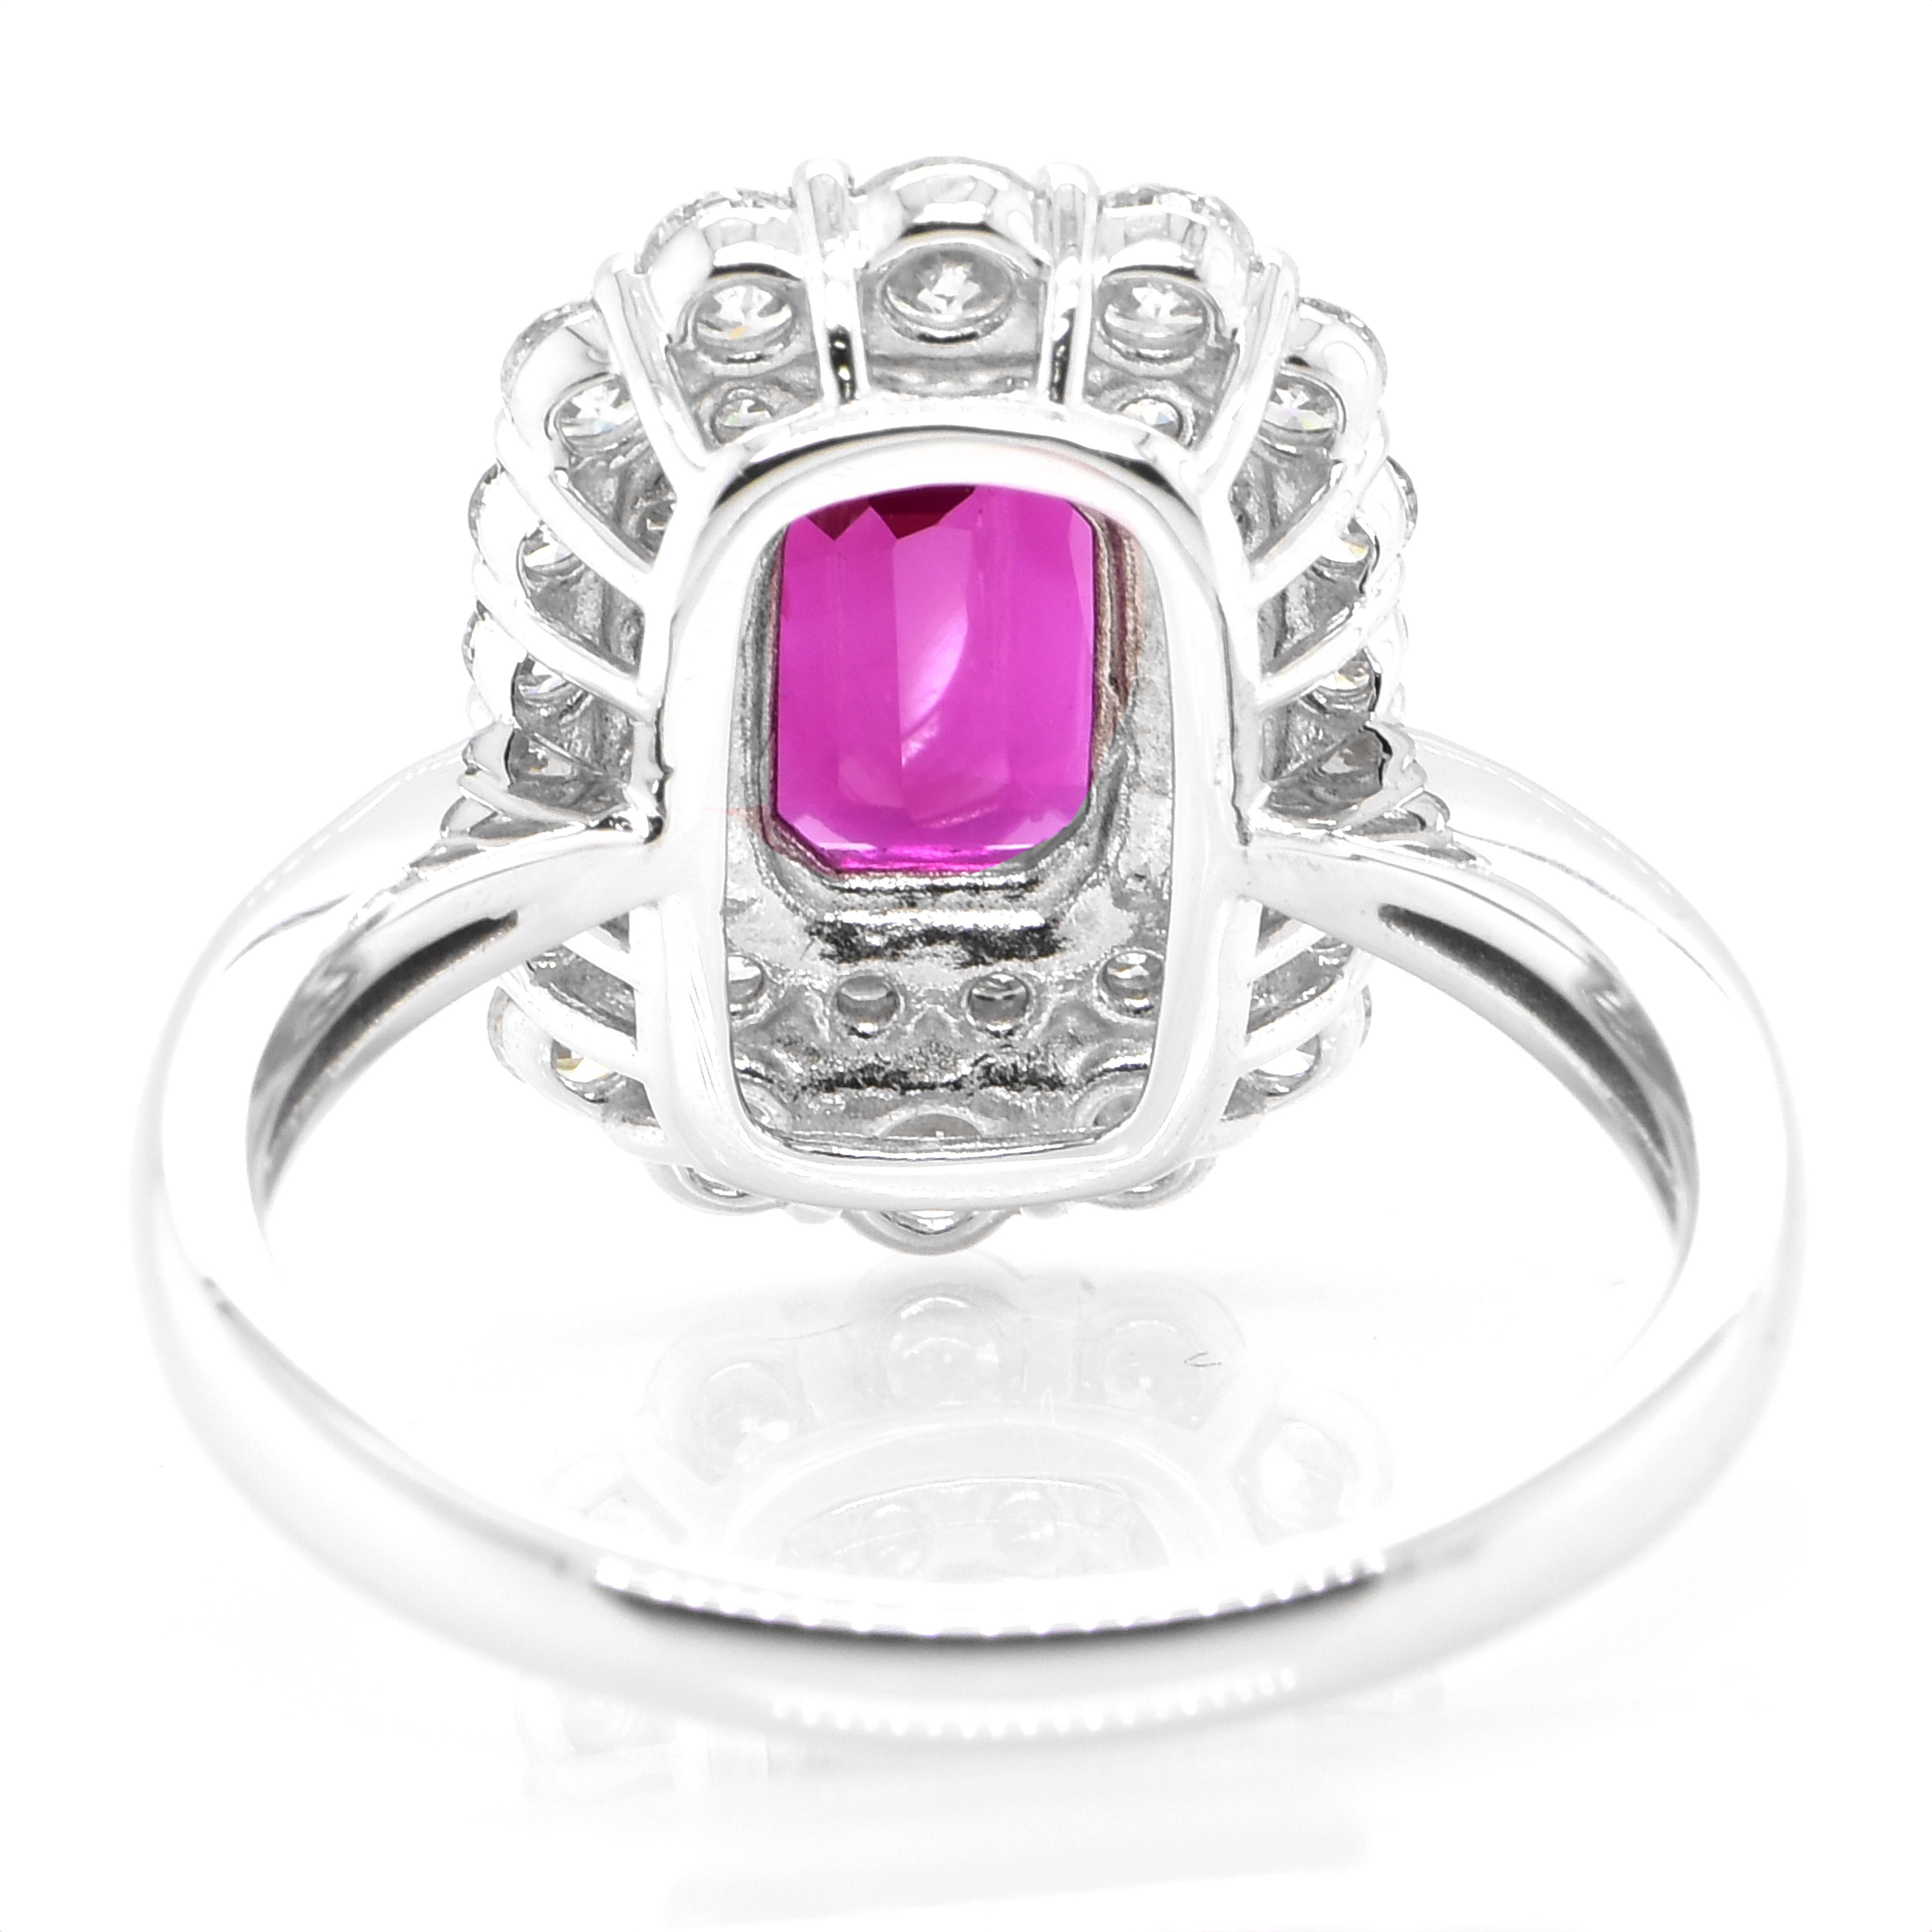 Women's AIGS Certified 1.20 Carat Untreated Ruby &Diamond Cocktail Ring Made in Platinum For Sale